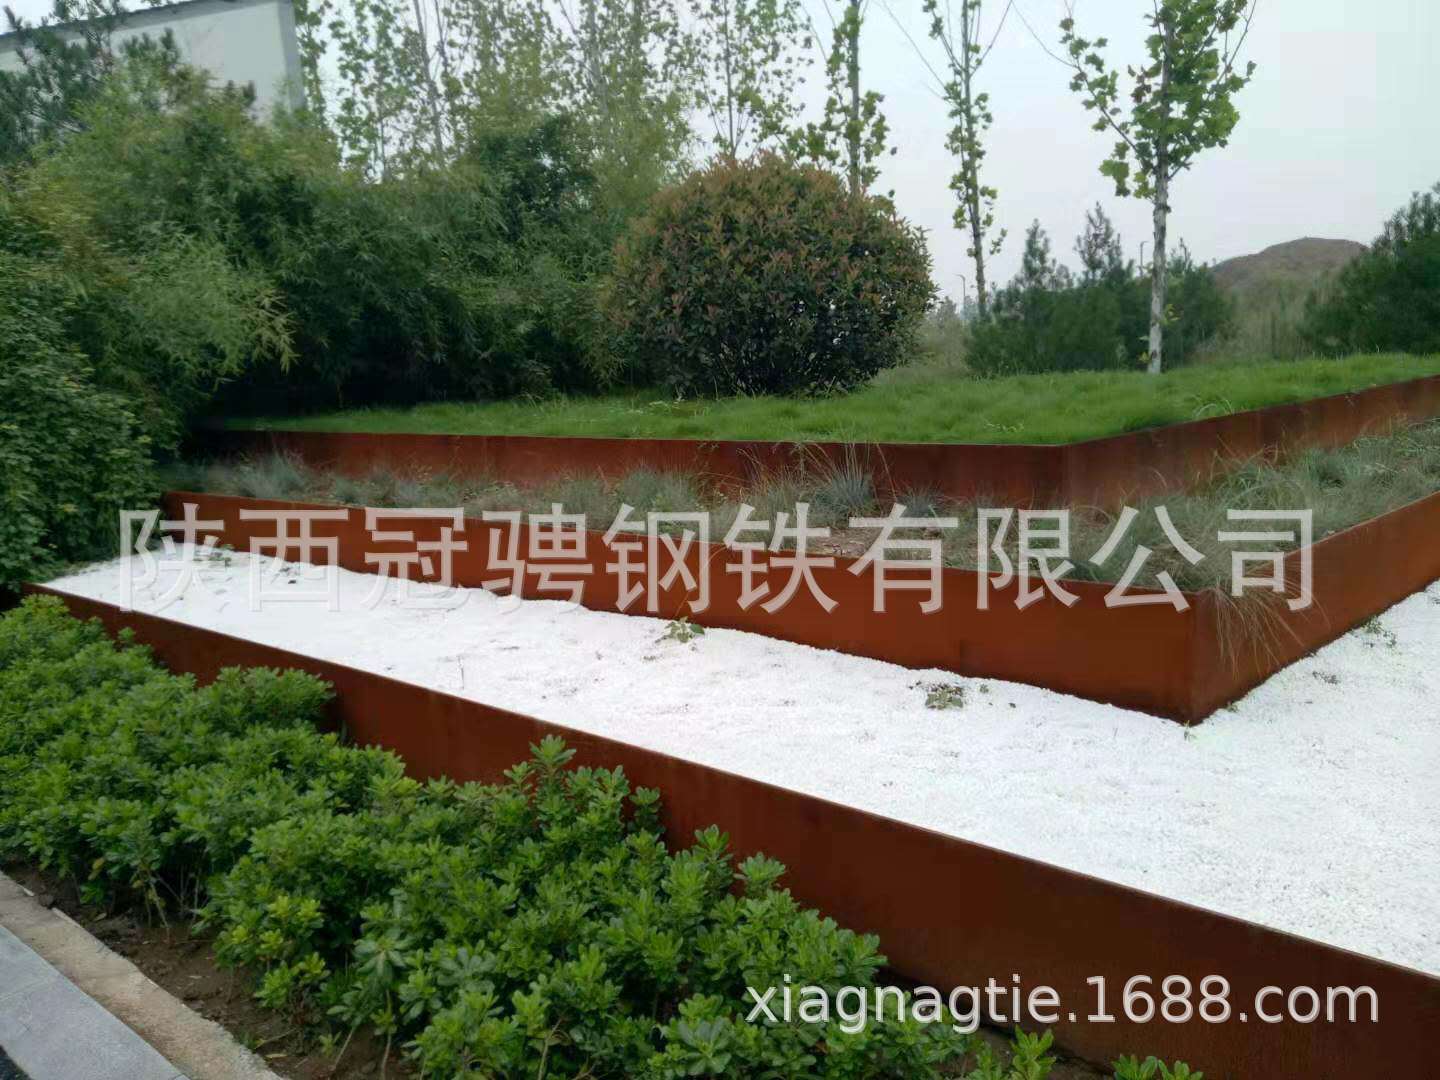 Xi'an 3.0 Weather resistant steel plate,Maryland steel plate Yinchuan steel plate Xining steel plate